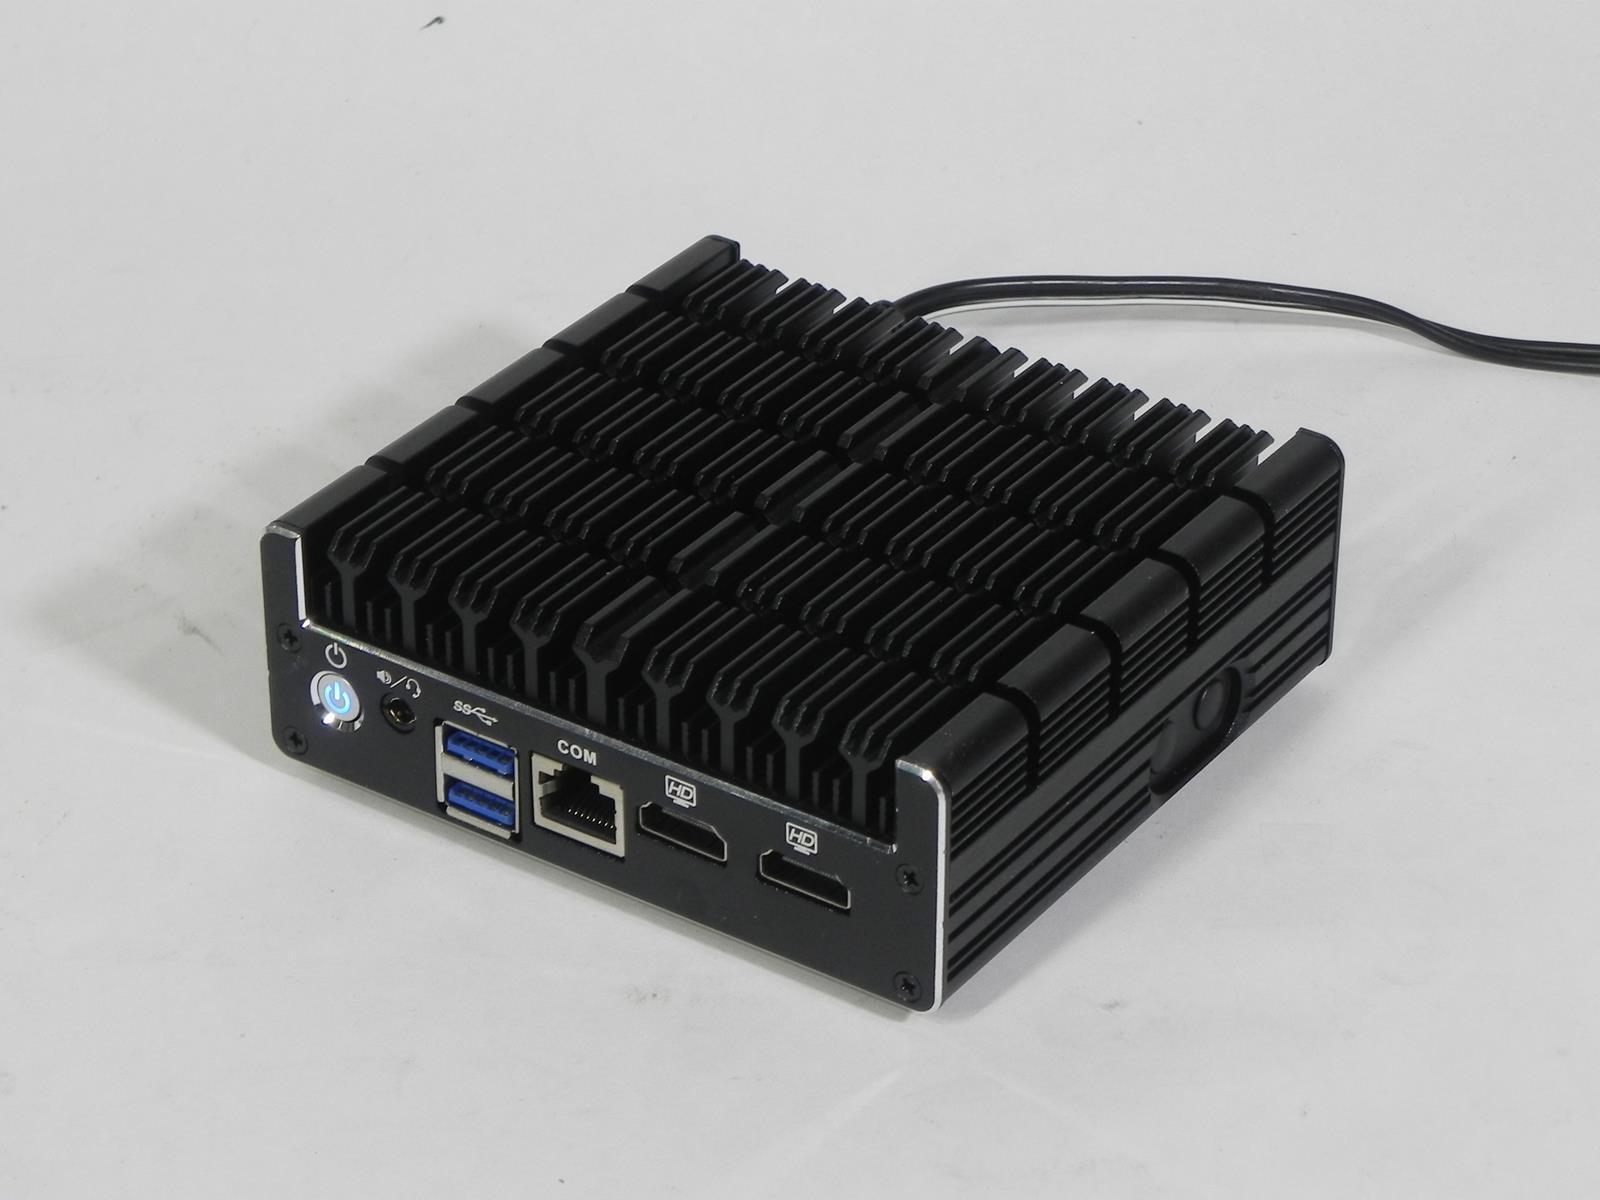 PROTECTLI The Vault FW4B-0-4-32 Opensource Firewall Router Mini PC 256GB SSD